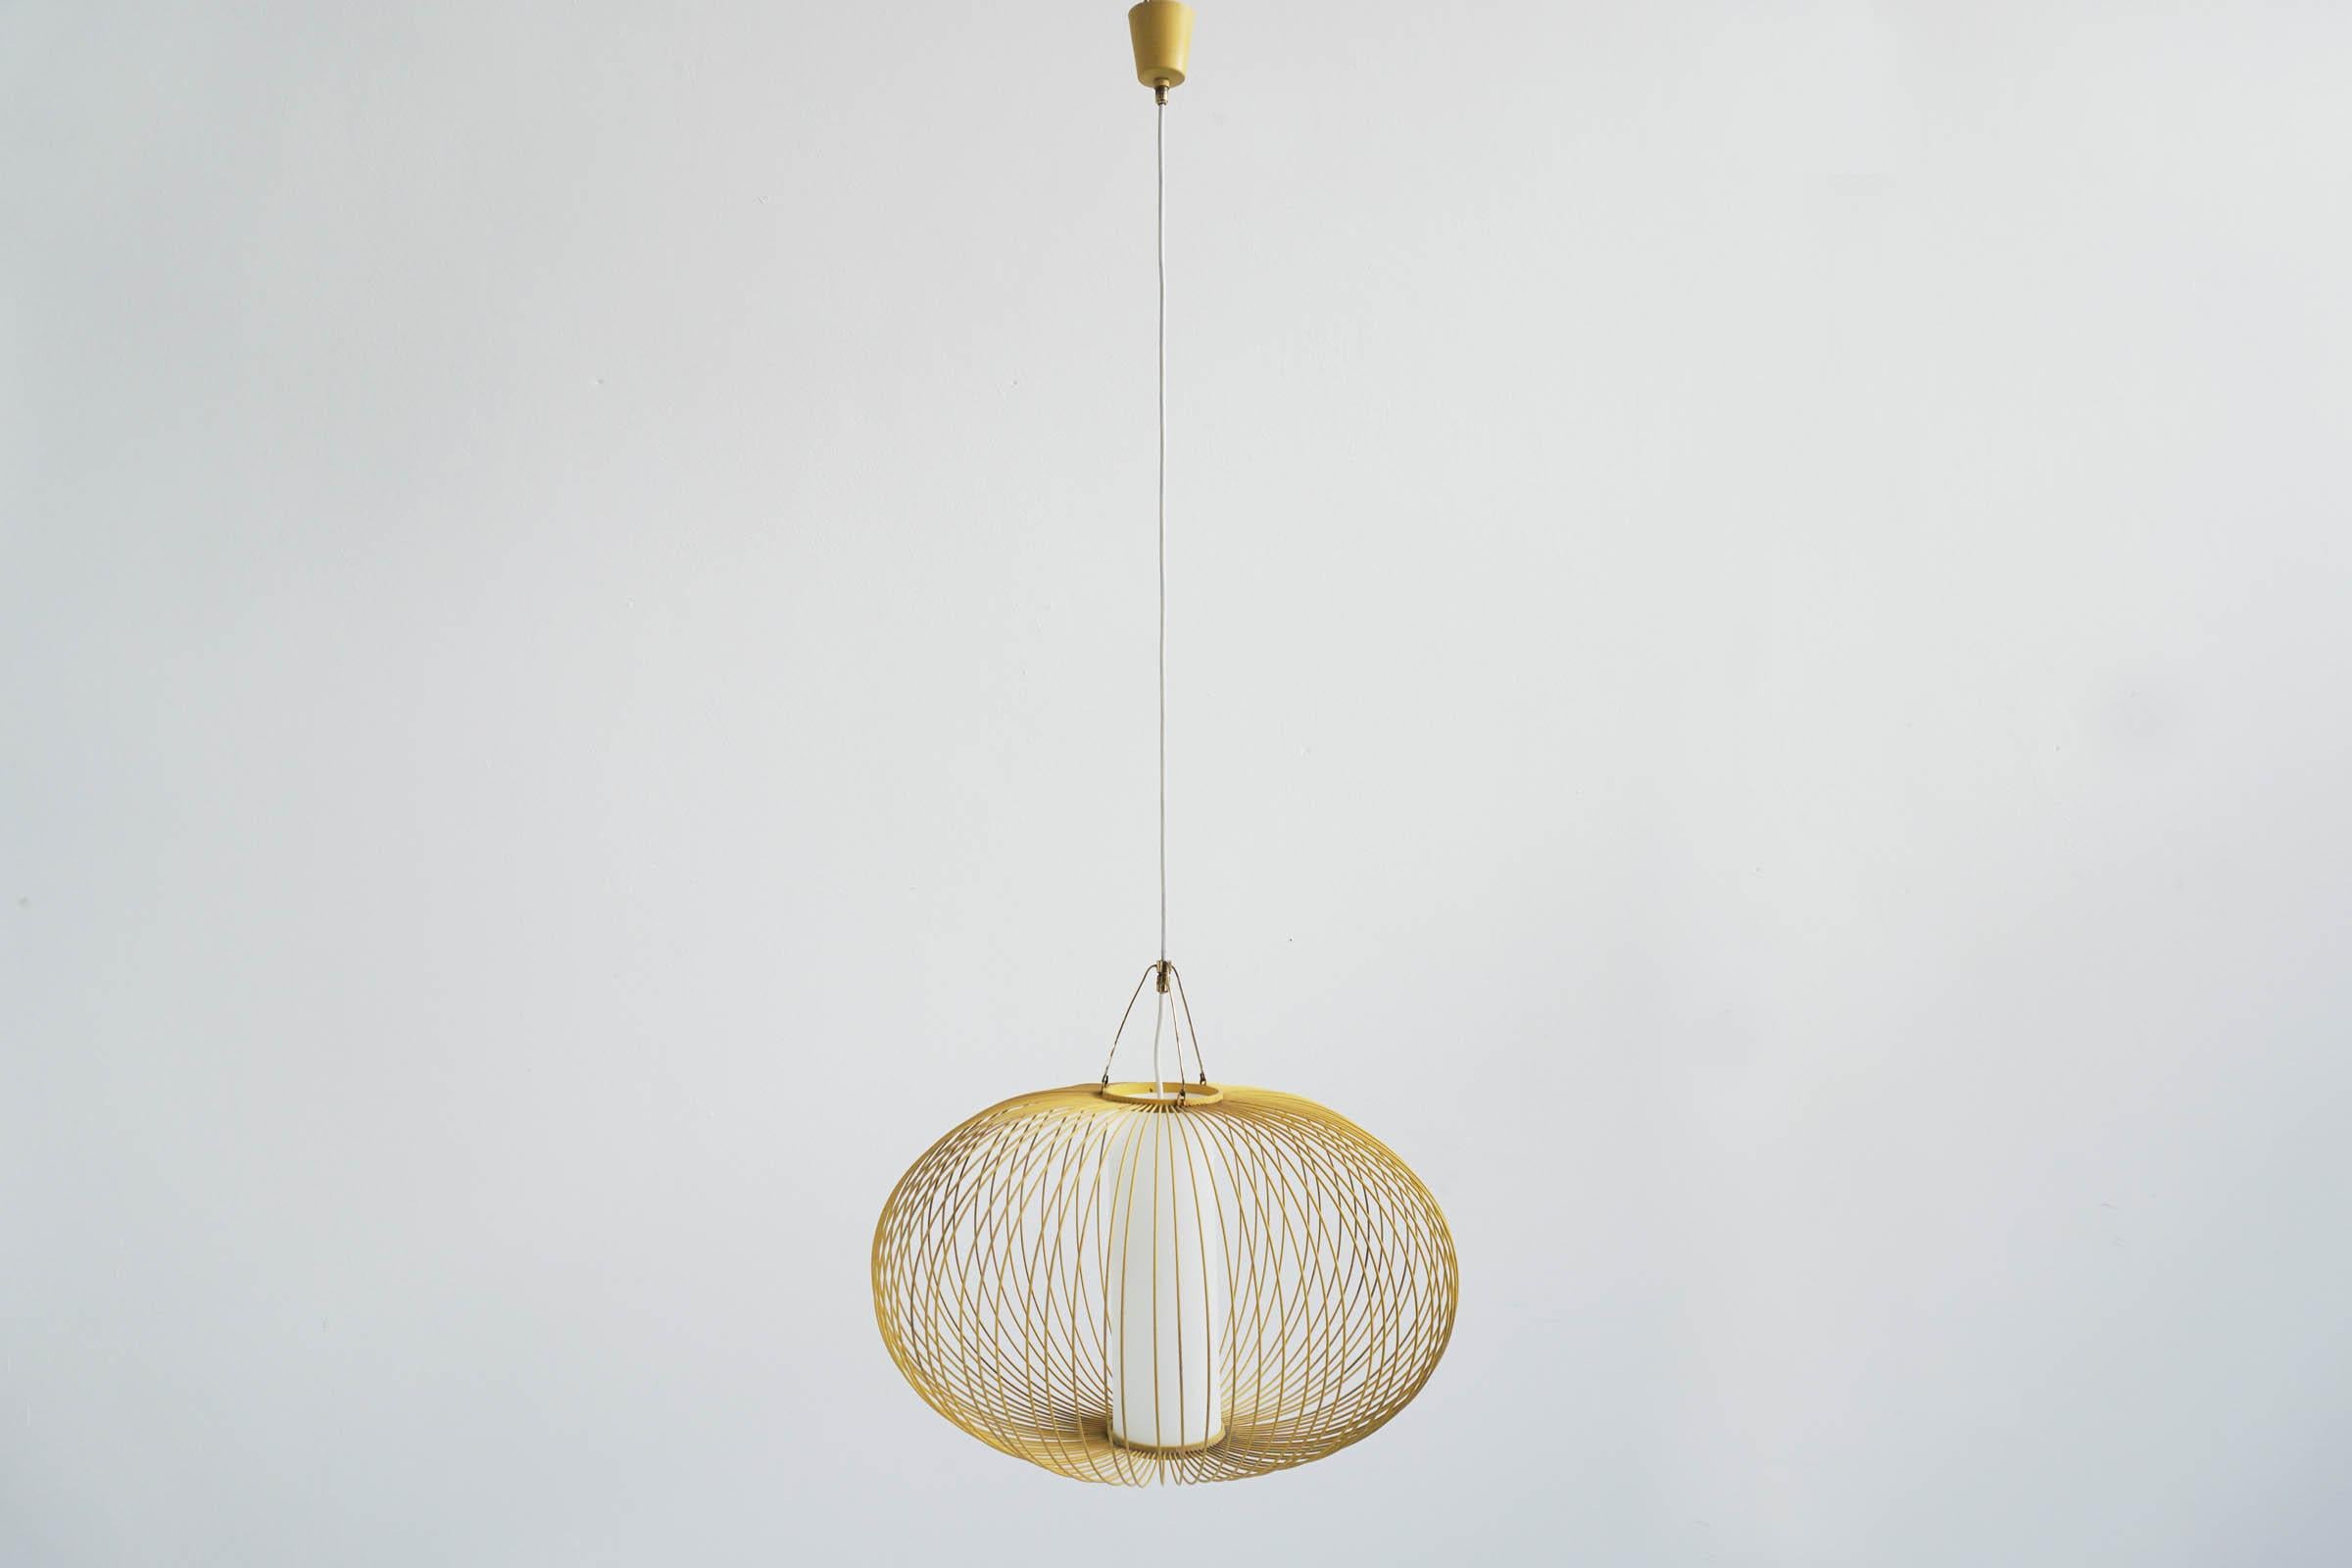 Beautiful hangin lamp with Japanese inspiration by Stilnovo.

Dimension of the shade diameter 50 cm
HT will be adjustable.